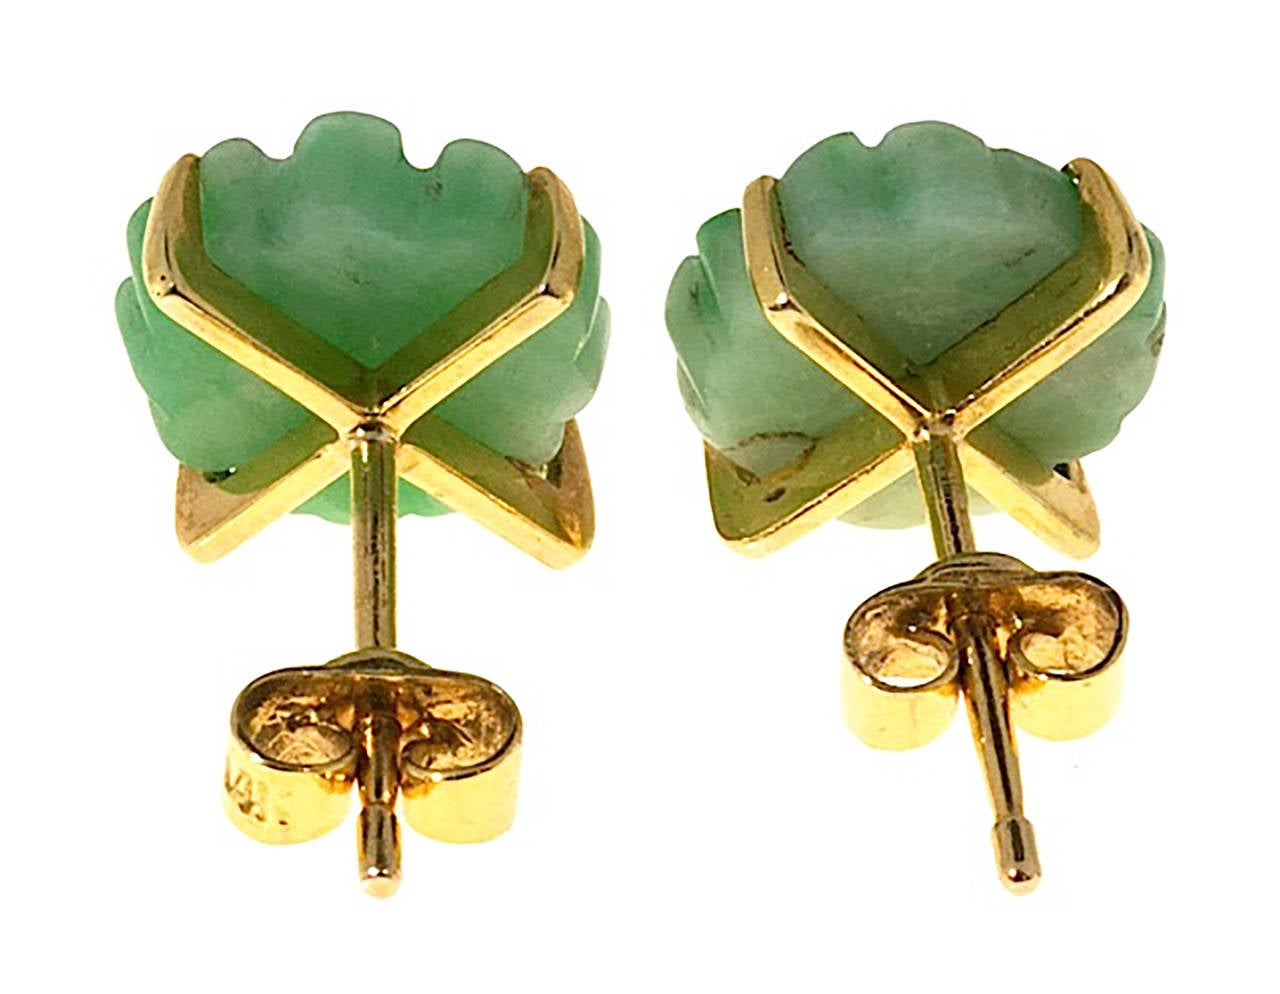 Round carved green and white flower earrings.

10.1 x 9.1 x 3.55mm. AGL certified natural Jadeite Jade carved flower earrings. AGL certificate #CS51262 A + B no heat and no enhancement Jadeite Jade
14k Yellow Gold
2.4 grams